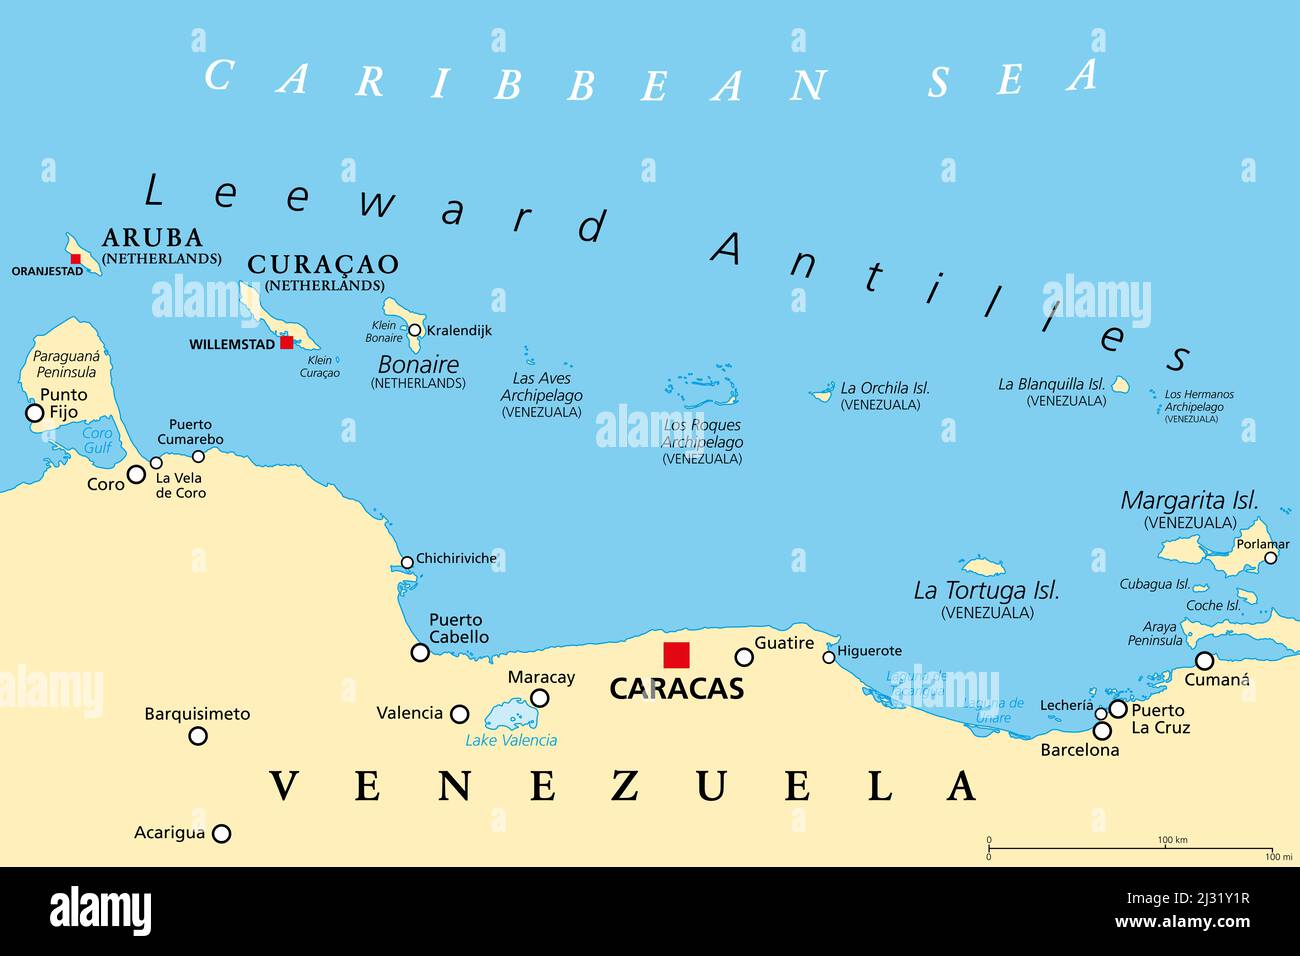 Leeward Antilles political map. Chain of islands in the Caribbean. From Aruba, Curacao and Bonaire to La Tortuga and Margarita Island. Stock Photo